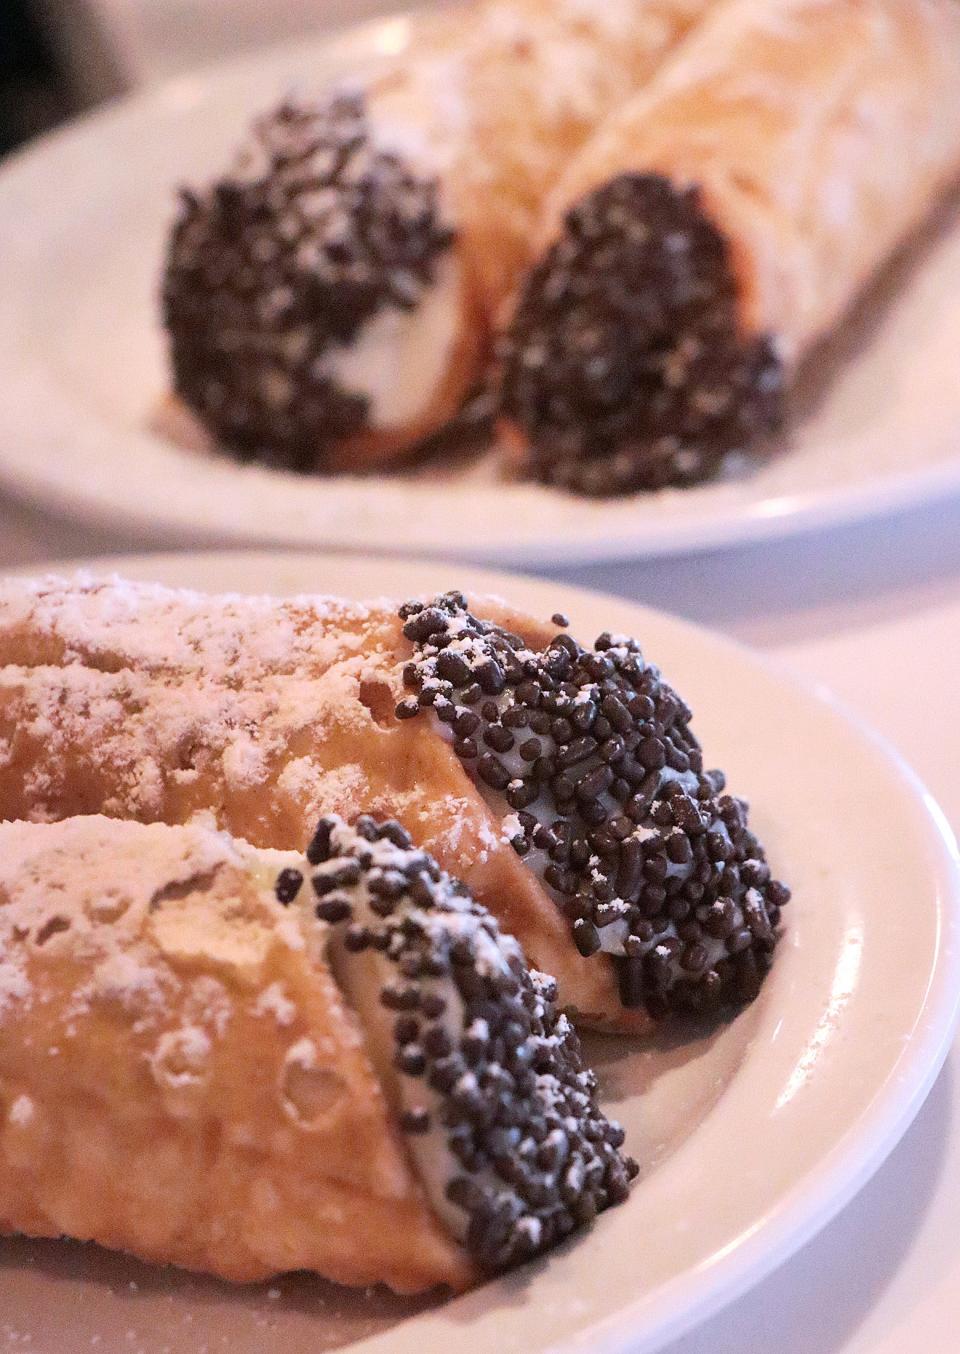 Homemade cannolis at Paradise Pizza are $2.99 each. Customers can also get Junior's Cheesecake slices for $7.95.